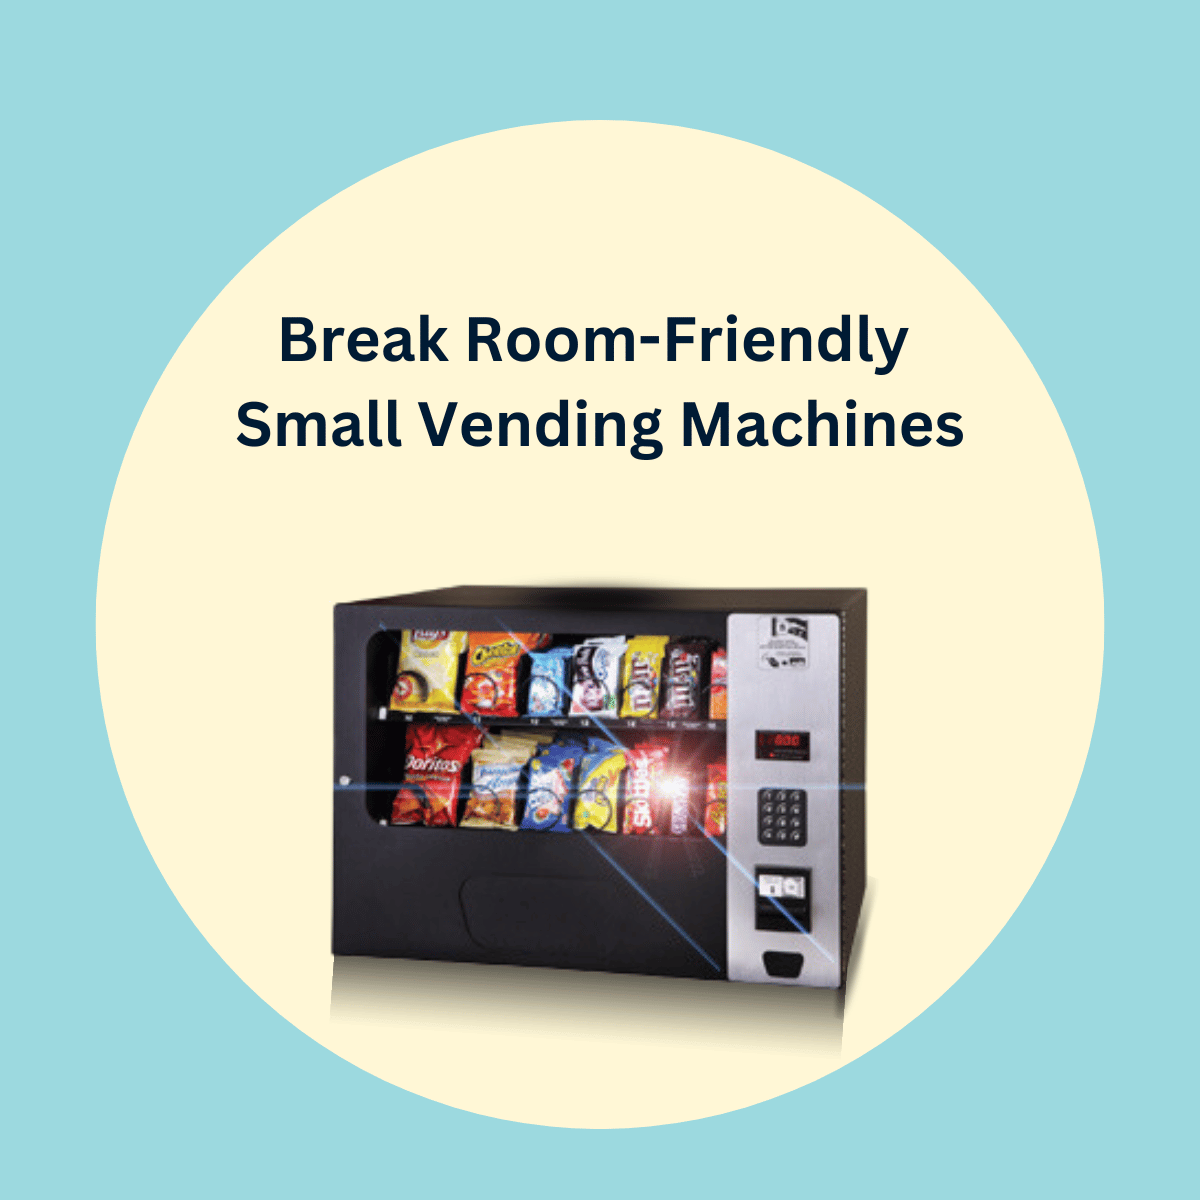 YOUR BREAK ROOM IS THE PERFECT PLACE FOR SMALL VENDING MACHINES